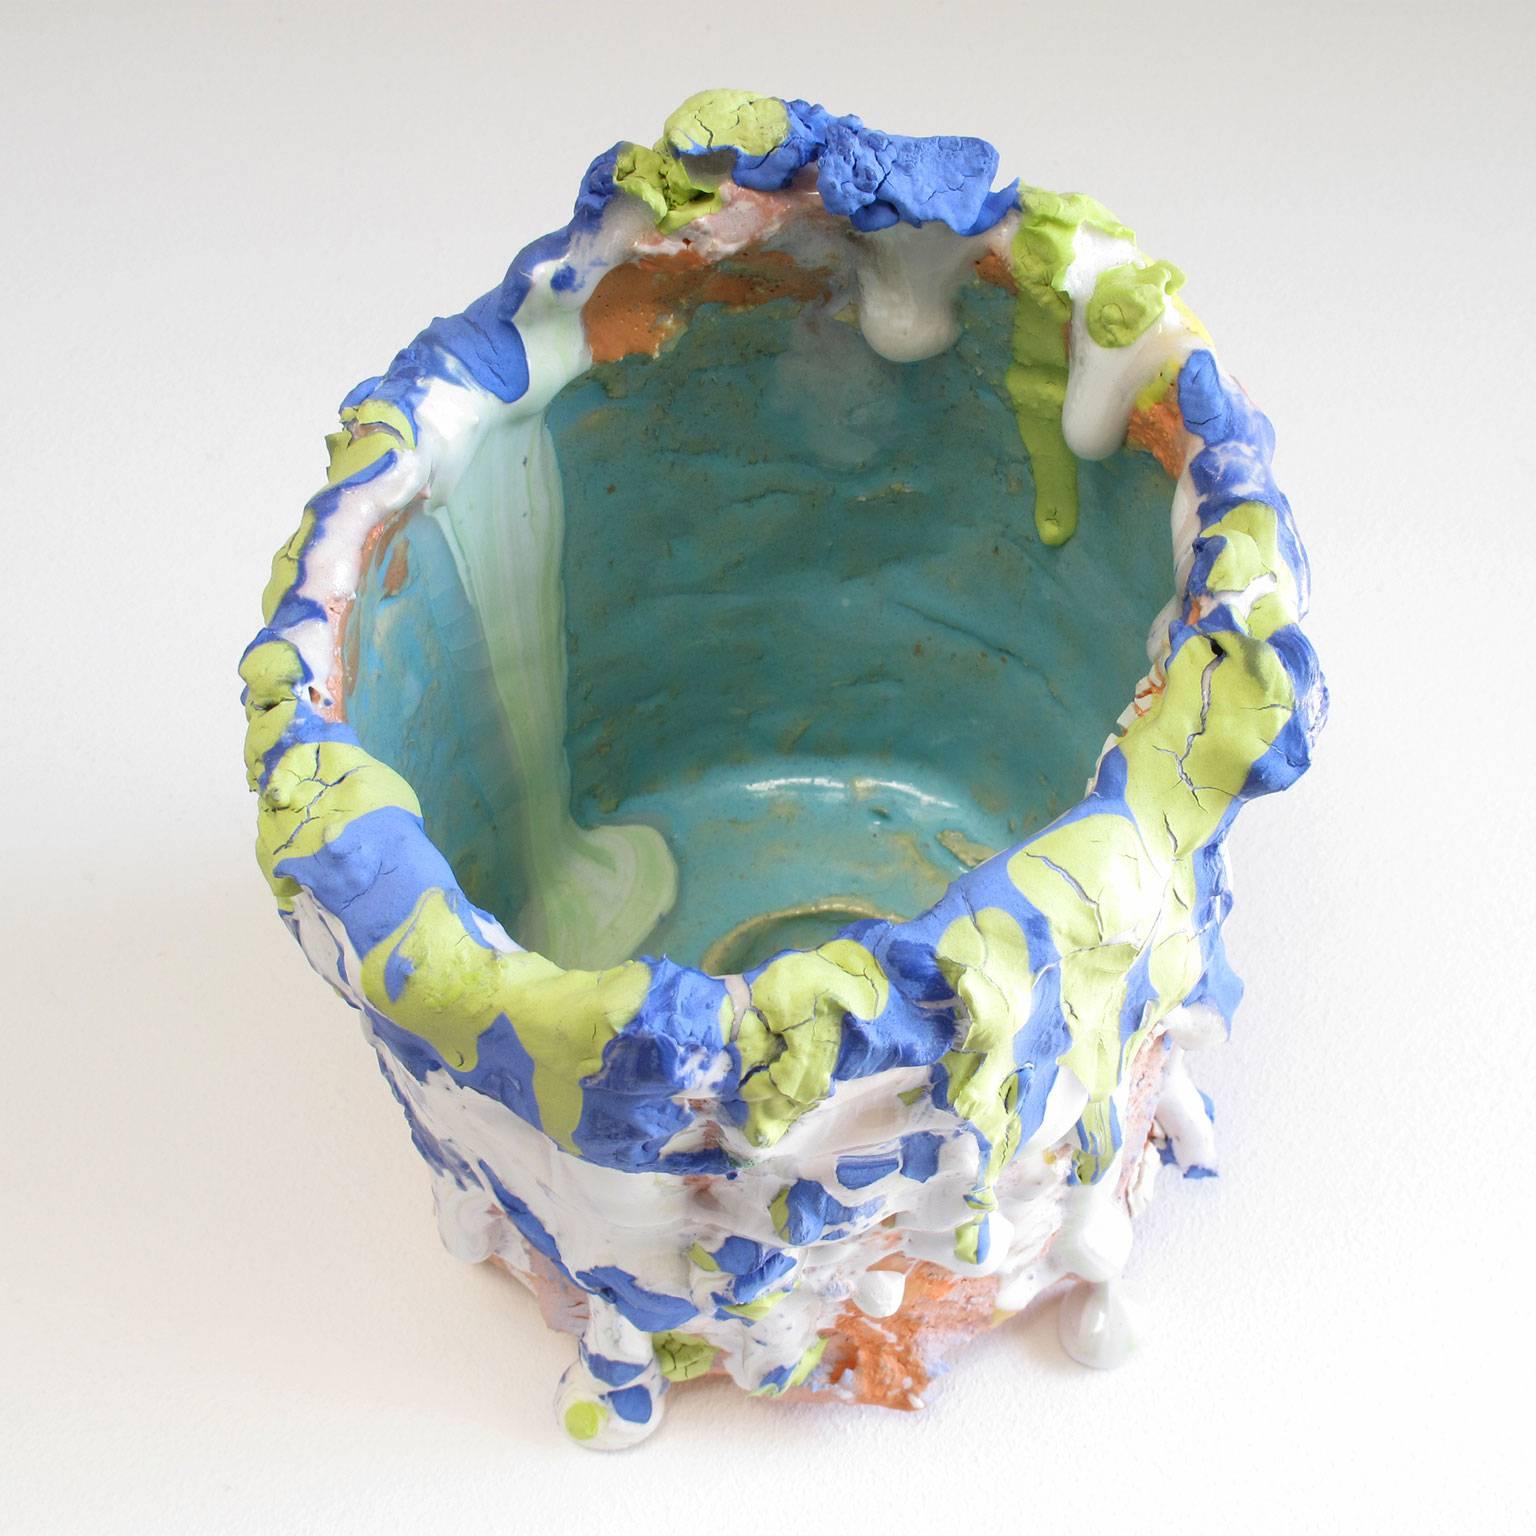 Porcelain Ceramic 'Cup' by Los Angeles Artist Brian Rochefort, 2015 For Sale